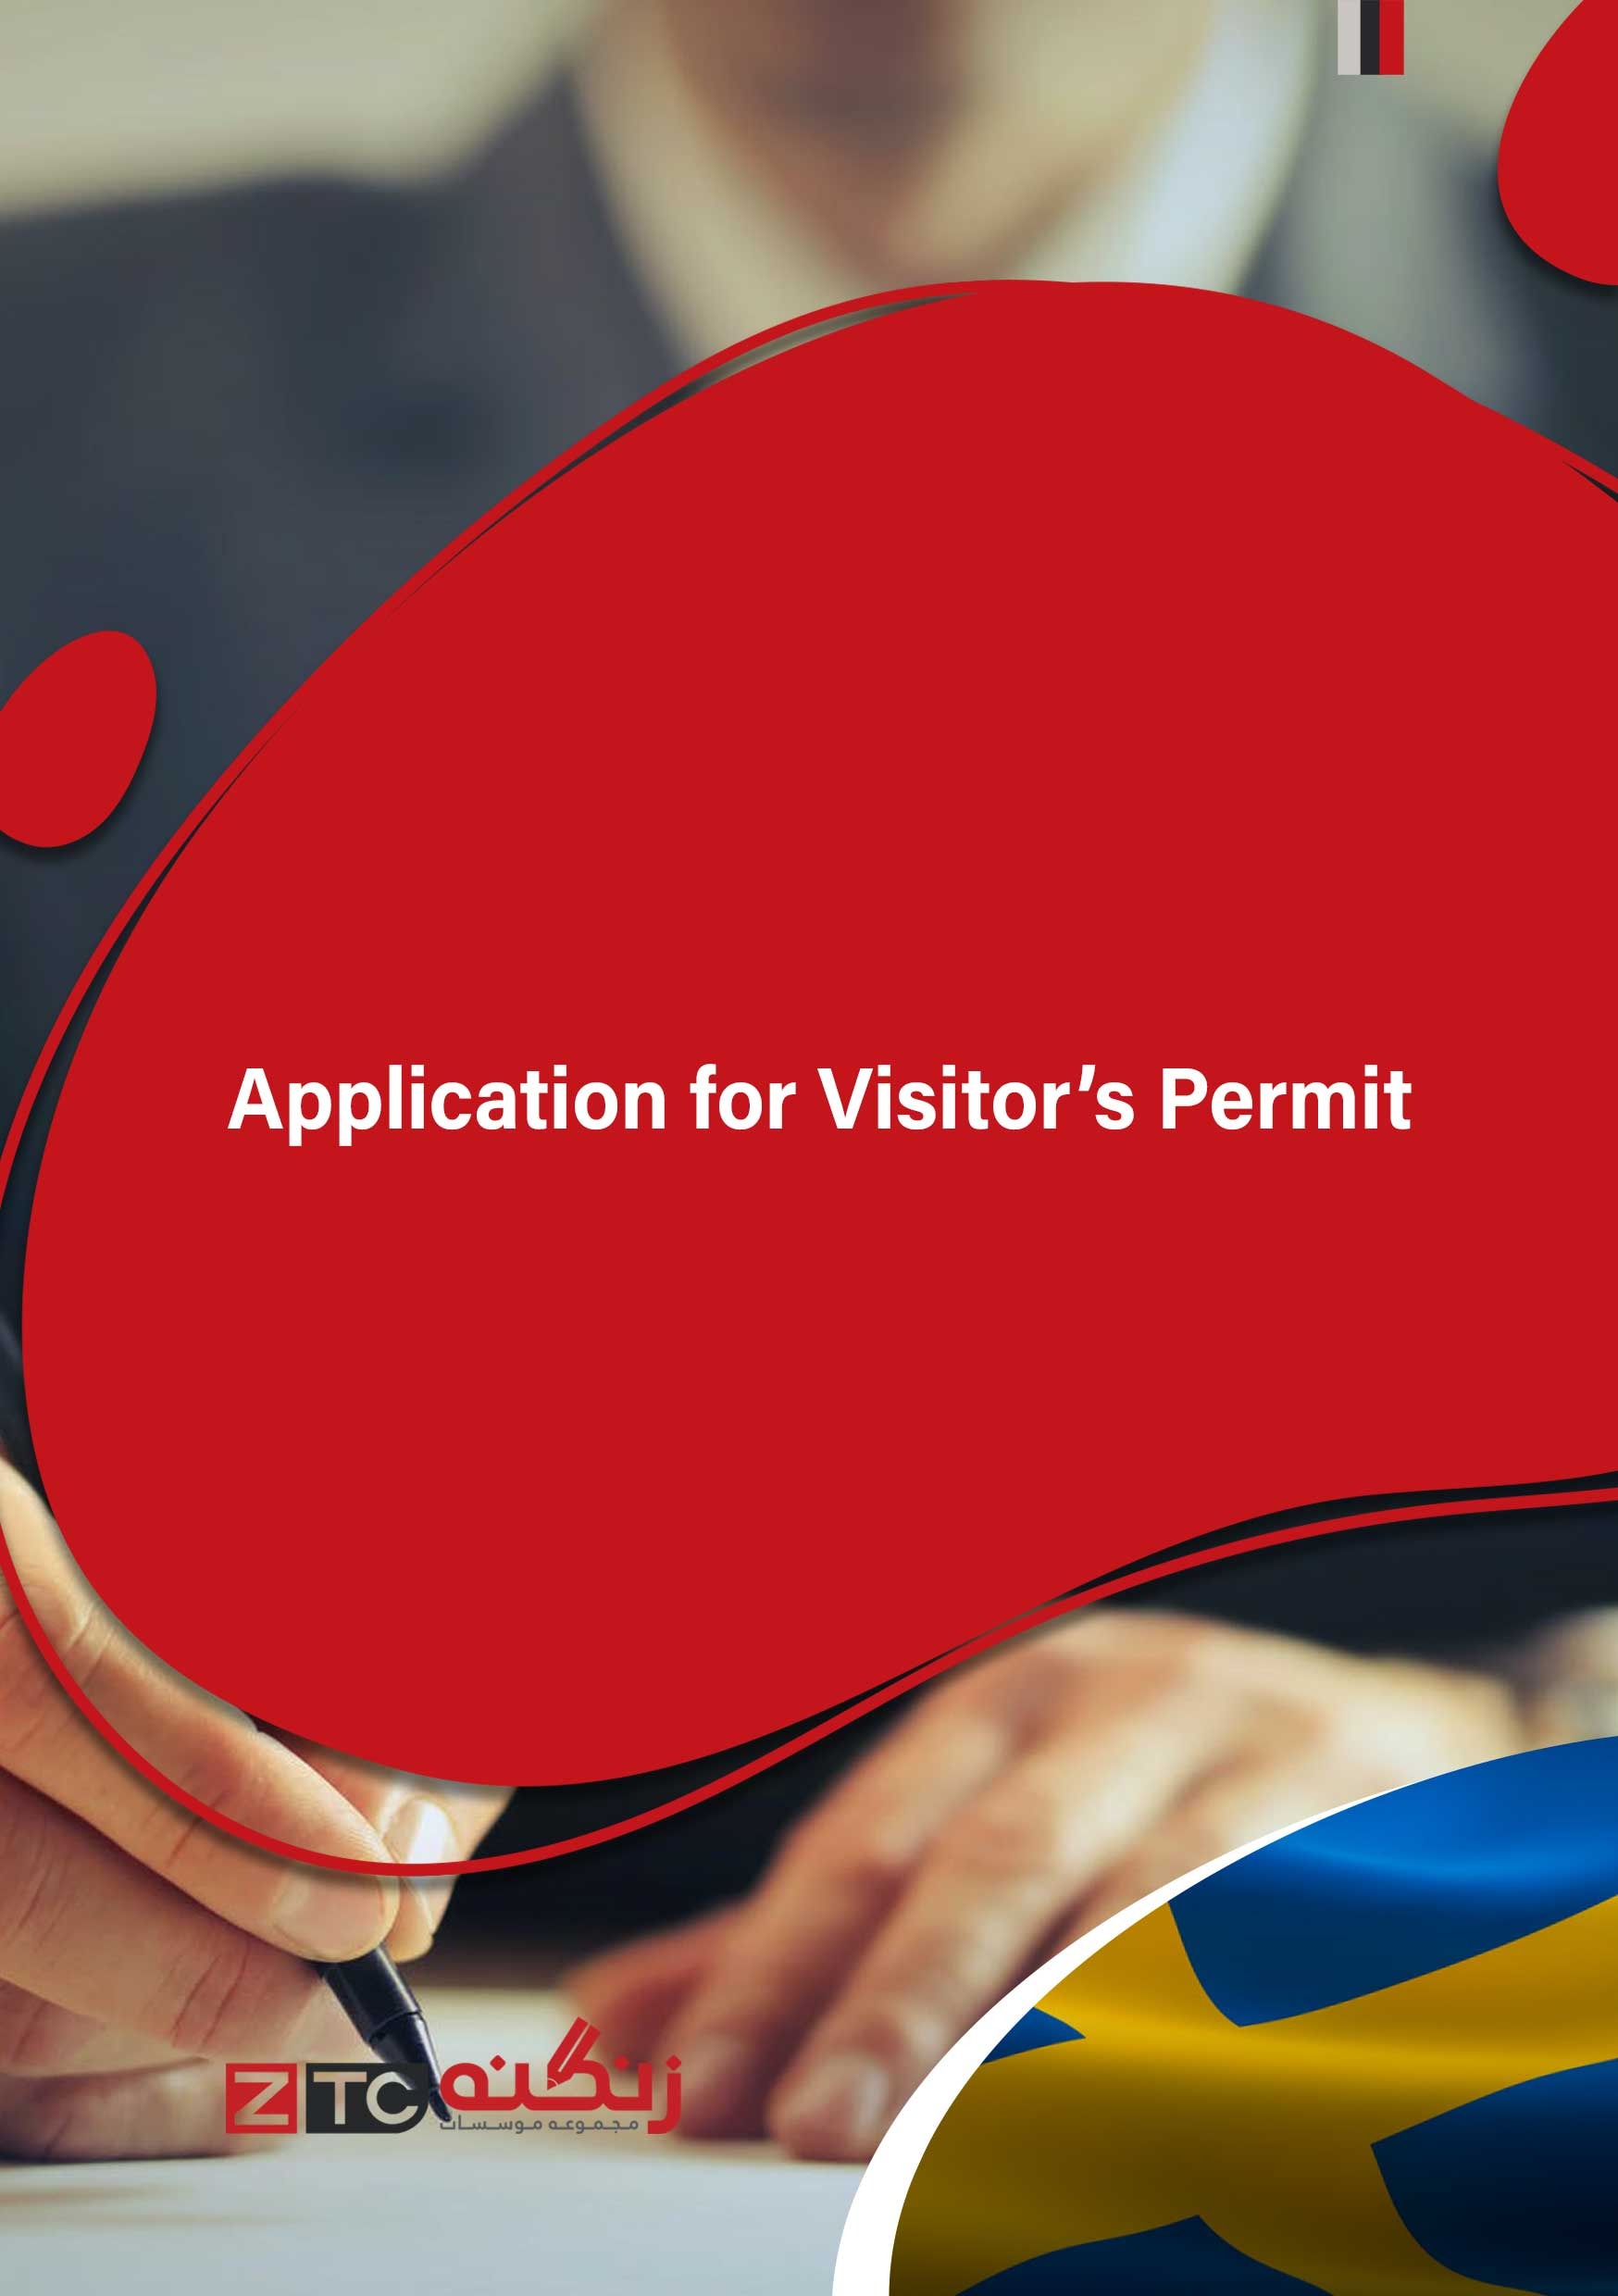 Application for Visitor’s Permit